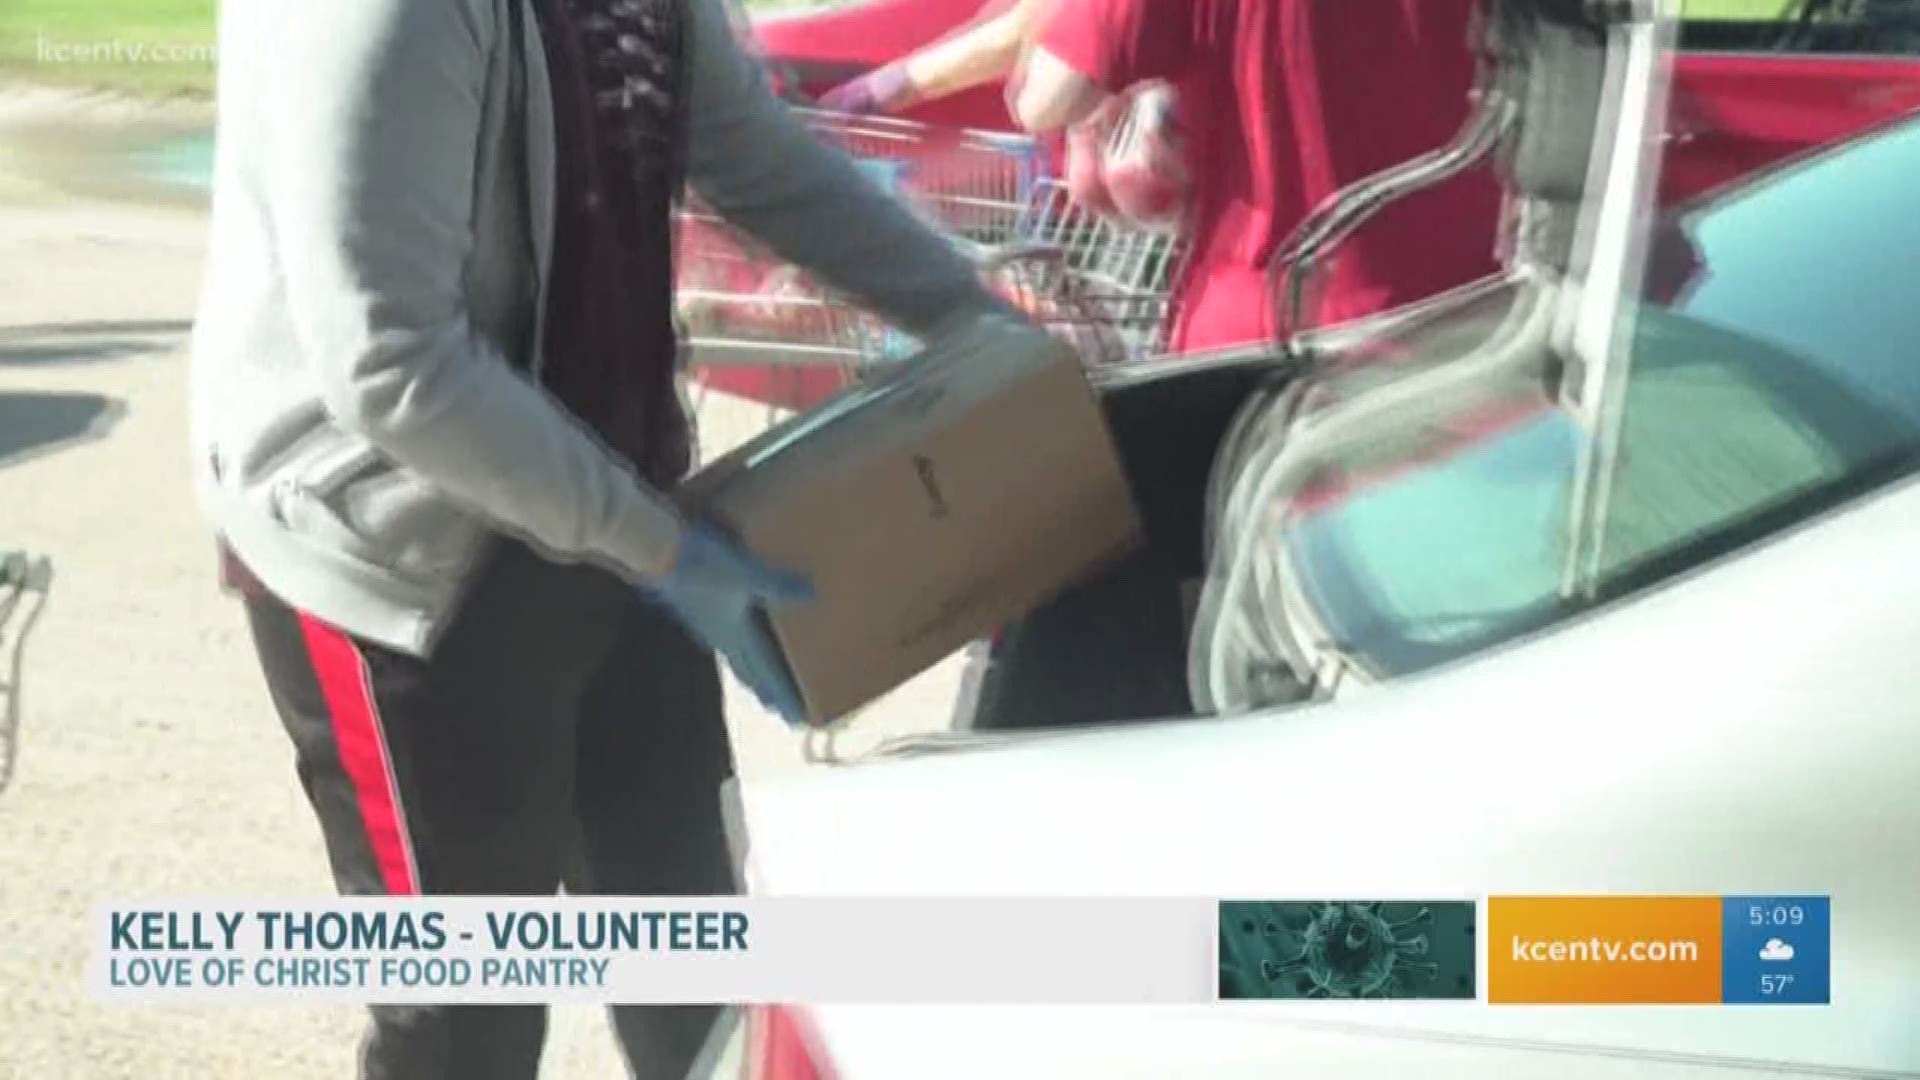 The Central Texas Food Bank expects to serve 1,500 families.